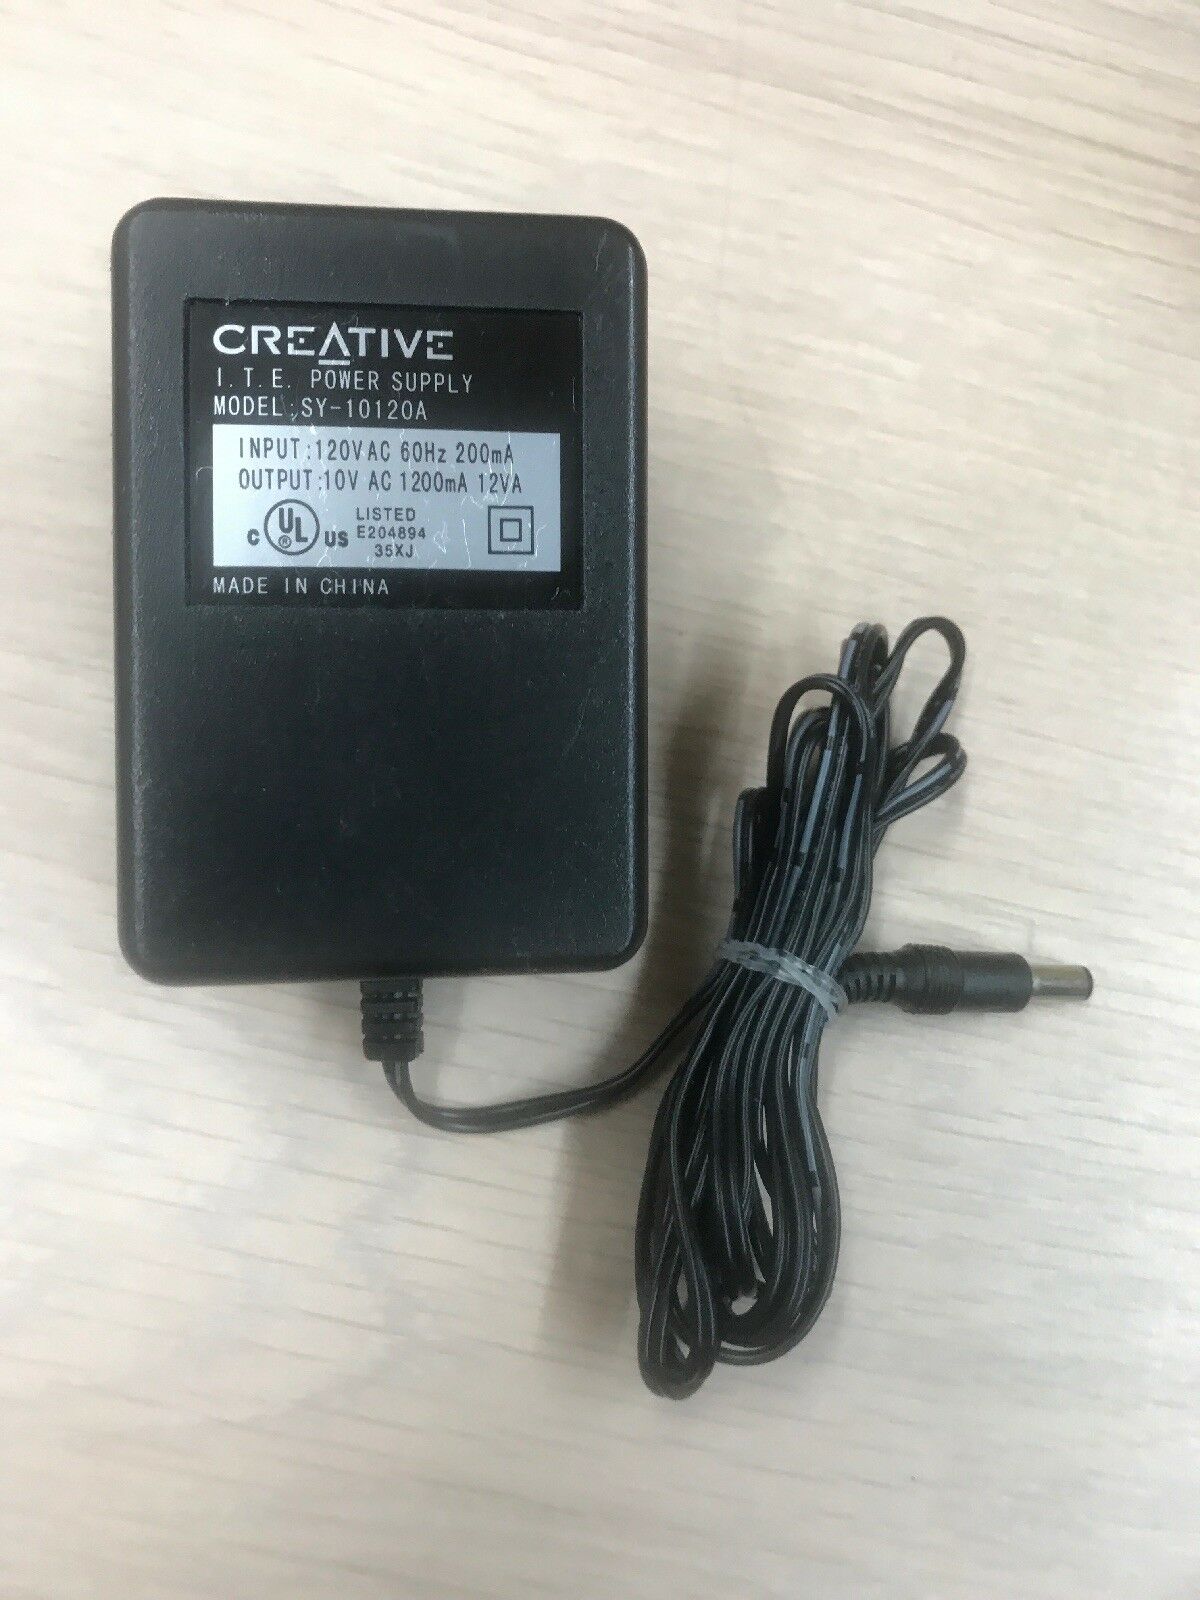 New 10VAC 1.2A AC/AC Adapter Creative SY-10120A 10VAC Power Supply Adapter Charger